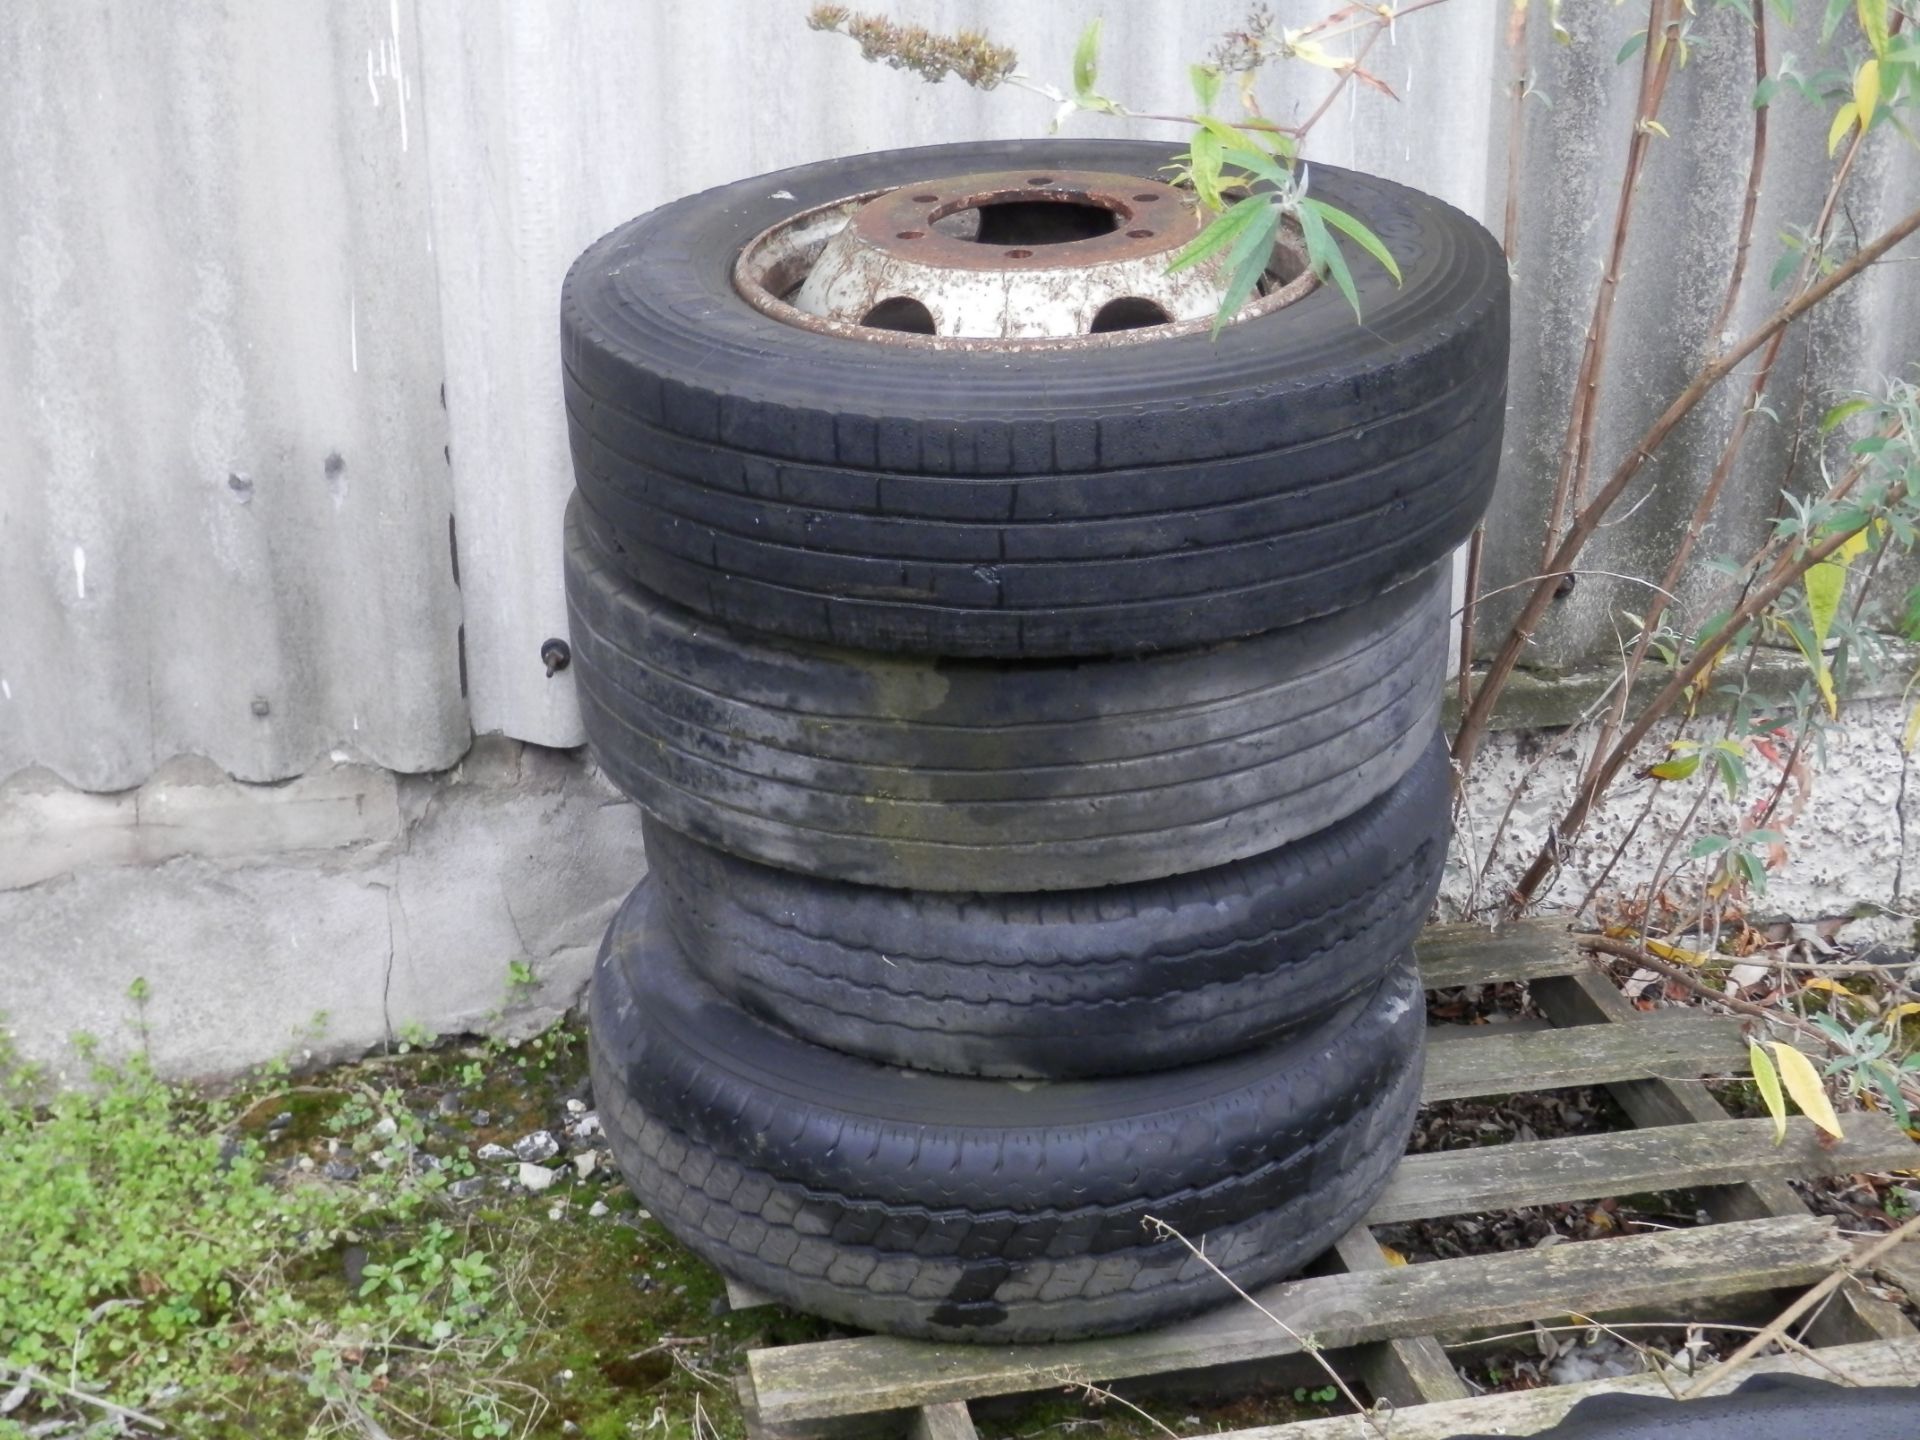 85 + ASSORTED LORRY, CAR & TRAILER TYRES & WHEELS, AS PICTURED. BUYER TO COLLECT COMPLETE JOBLOT. - Image 6 of 10